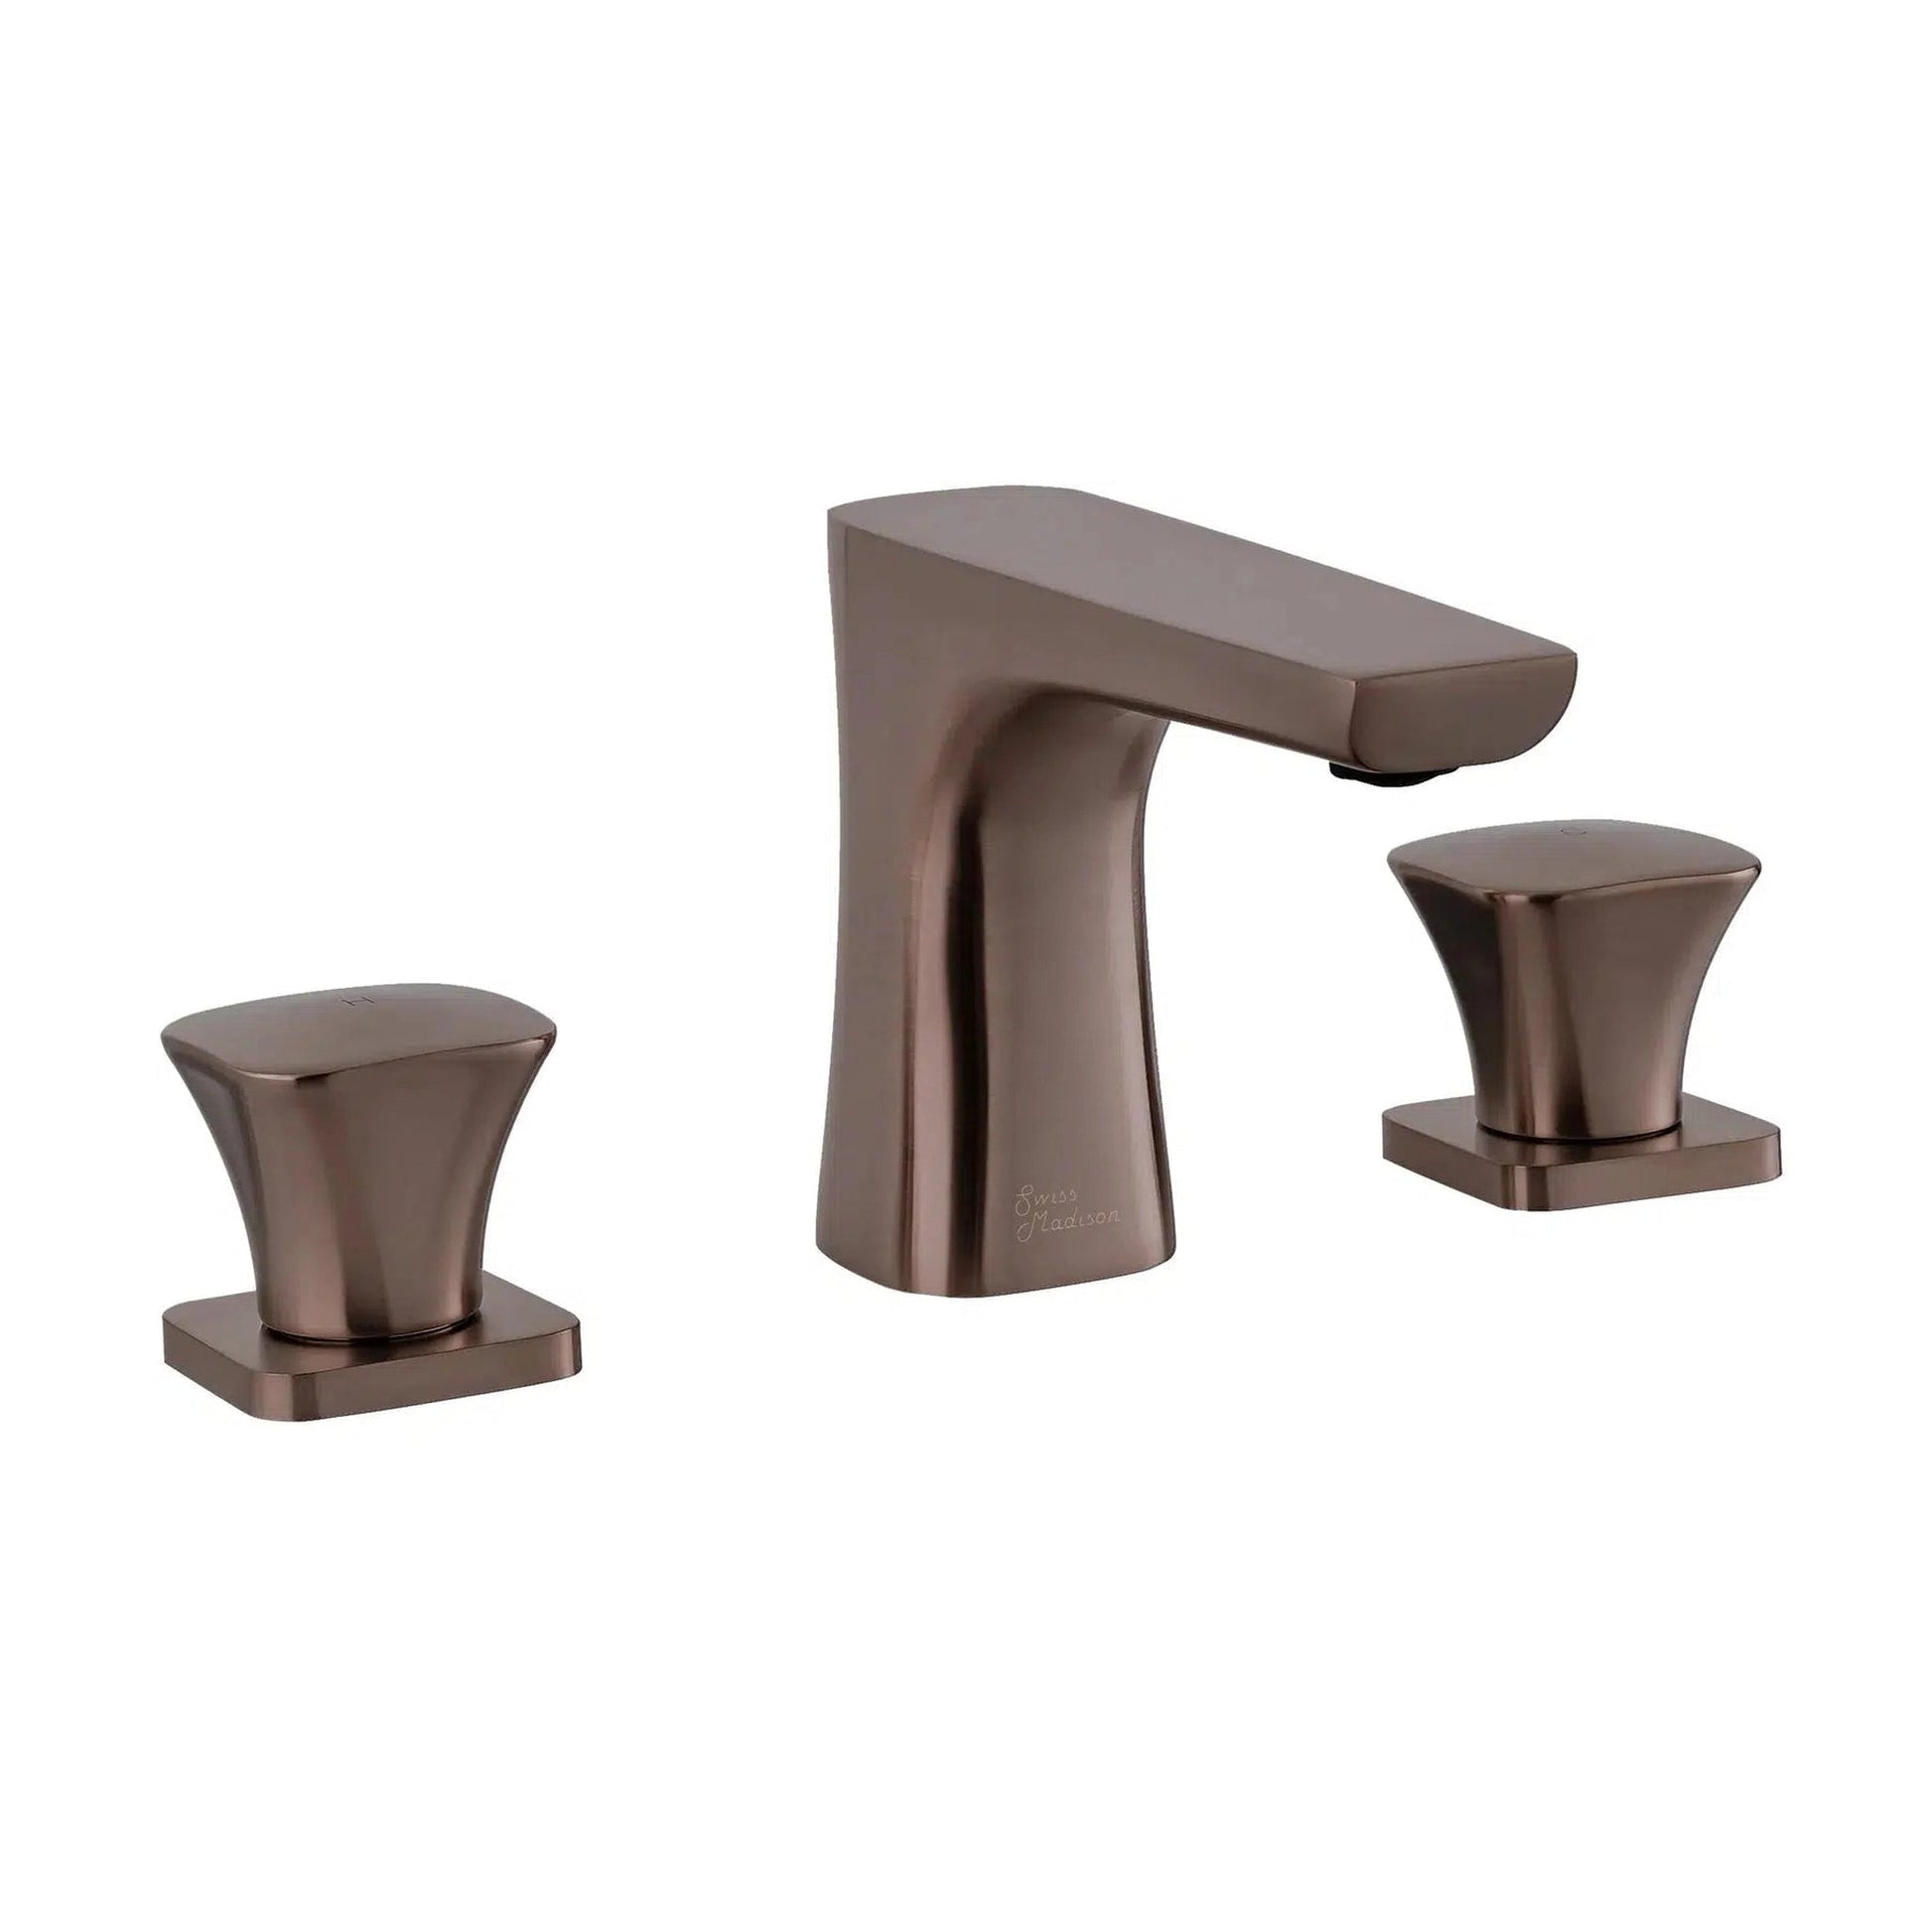 Swiss Madison Monaco 8" Oil Rubbed Bronze Widespread Bathroom Faucet With Knob Handles and 1.2 GPM Flow Rate